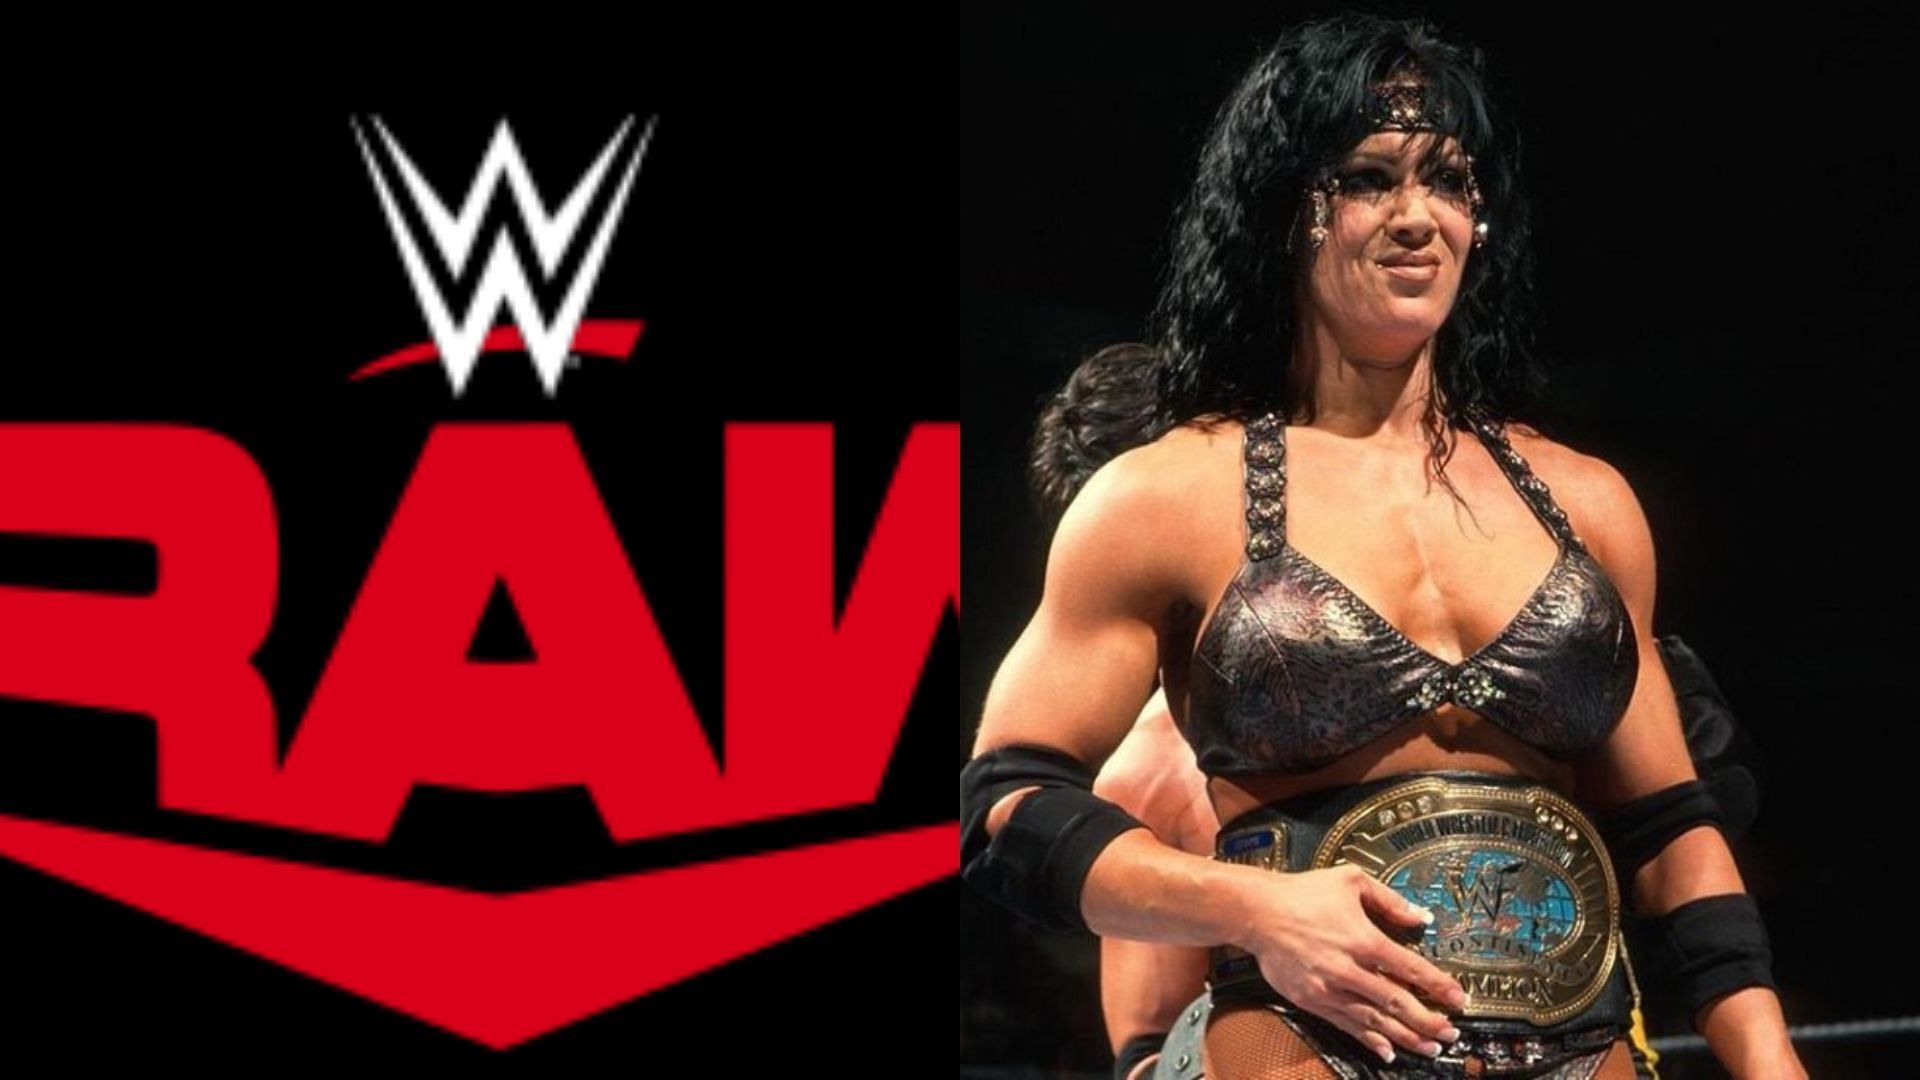 The RAW star spoke of her admiration of Chyna